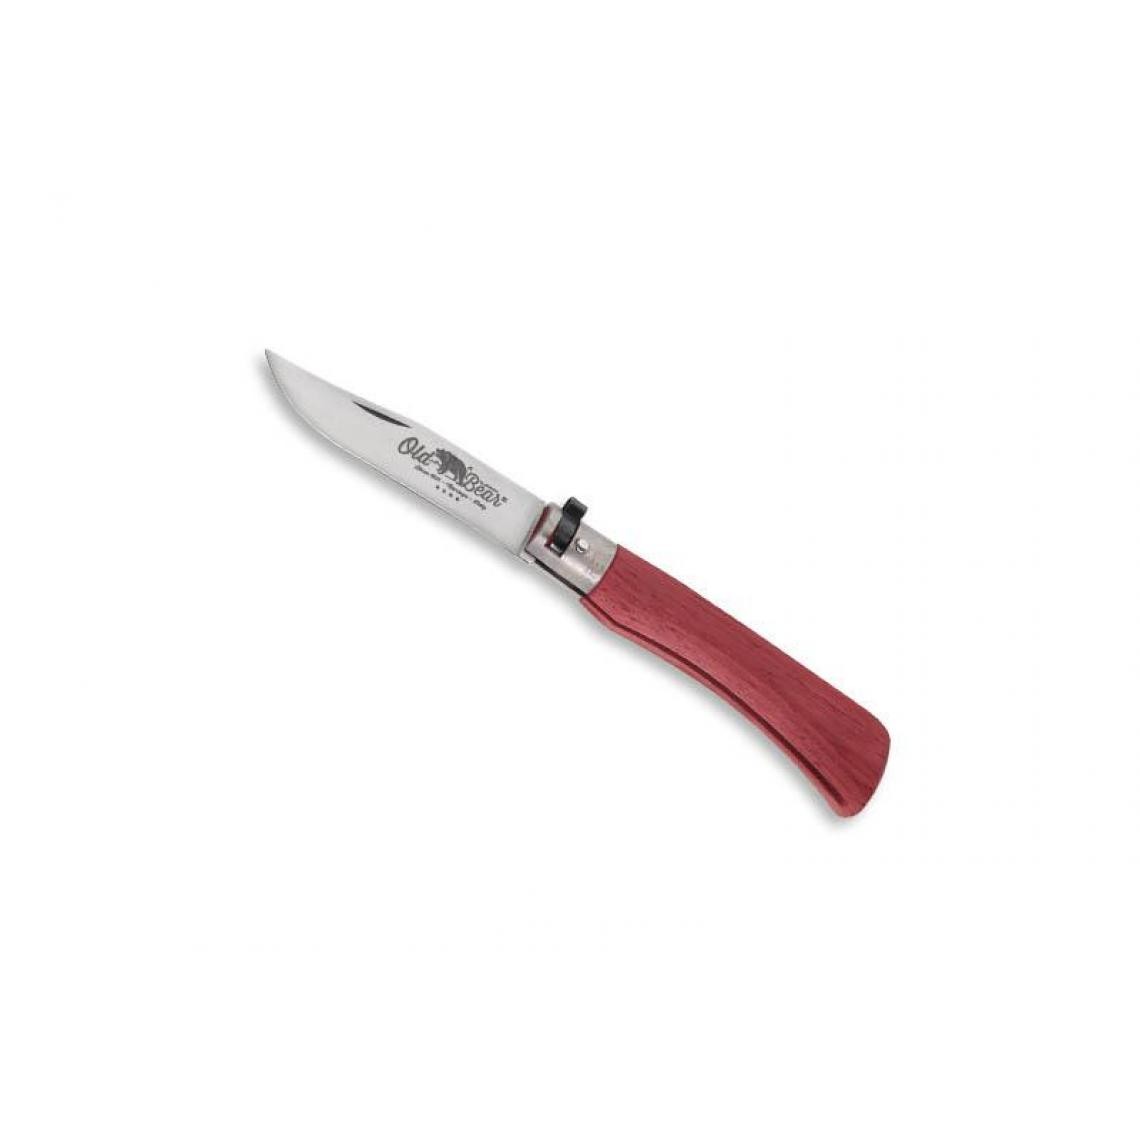 Divers Marques - OLD BEAR - 323.M - COUTEAU OLD BEAR FULL COLOR ROUGE TAILLE M - Outils de coupe